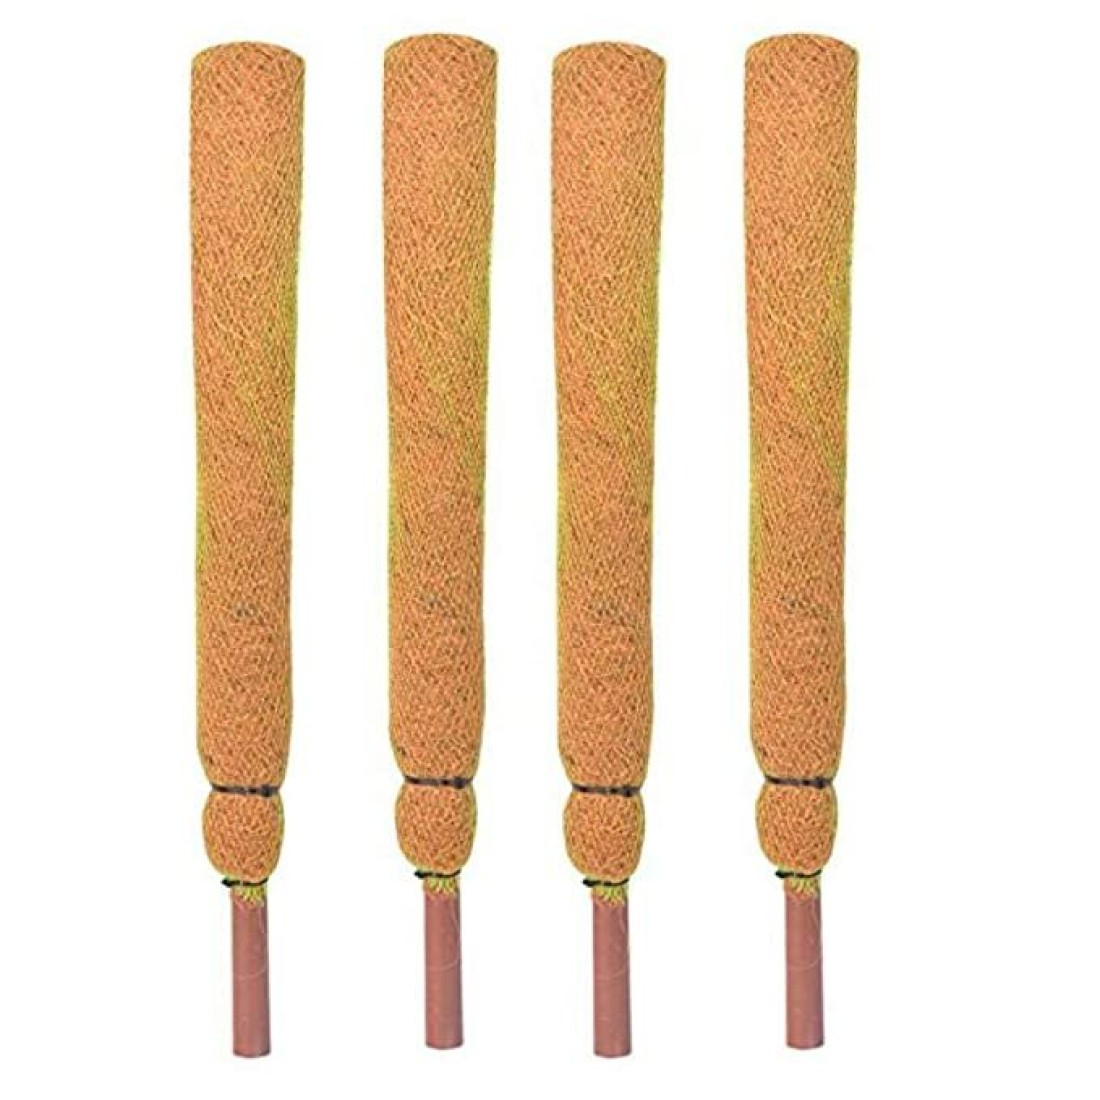 Coco Pole 3 Feet (90 cm) Moss & Coir Stick for Money Plant Support, Indoor Plants, House Plants & Plant Creepers-set of 4 2